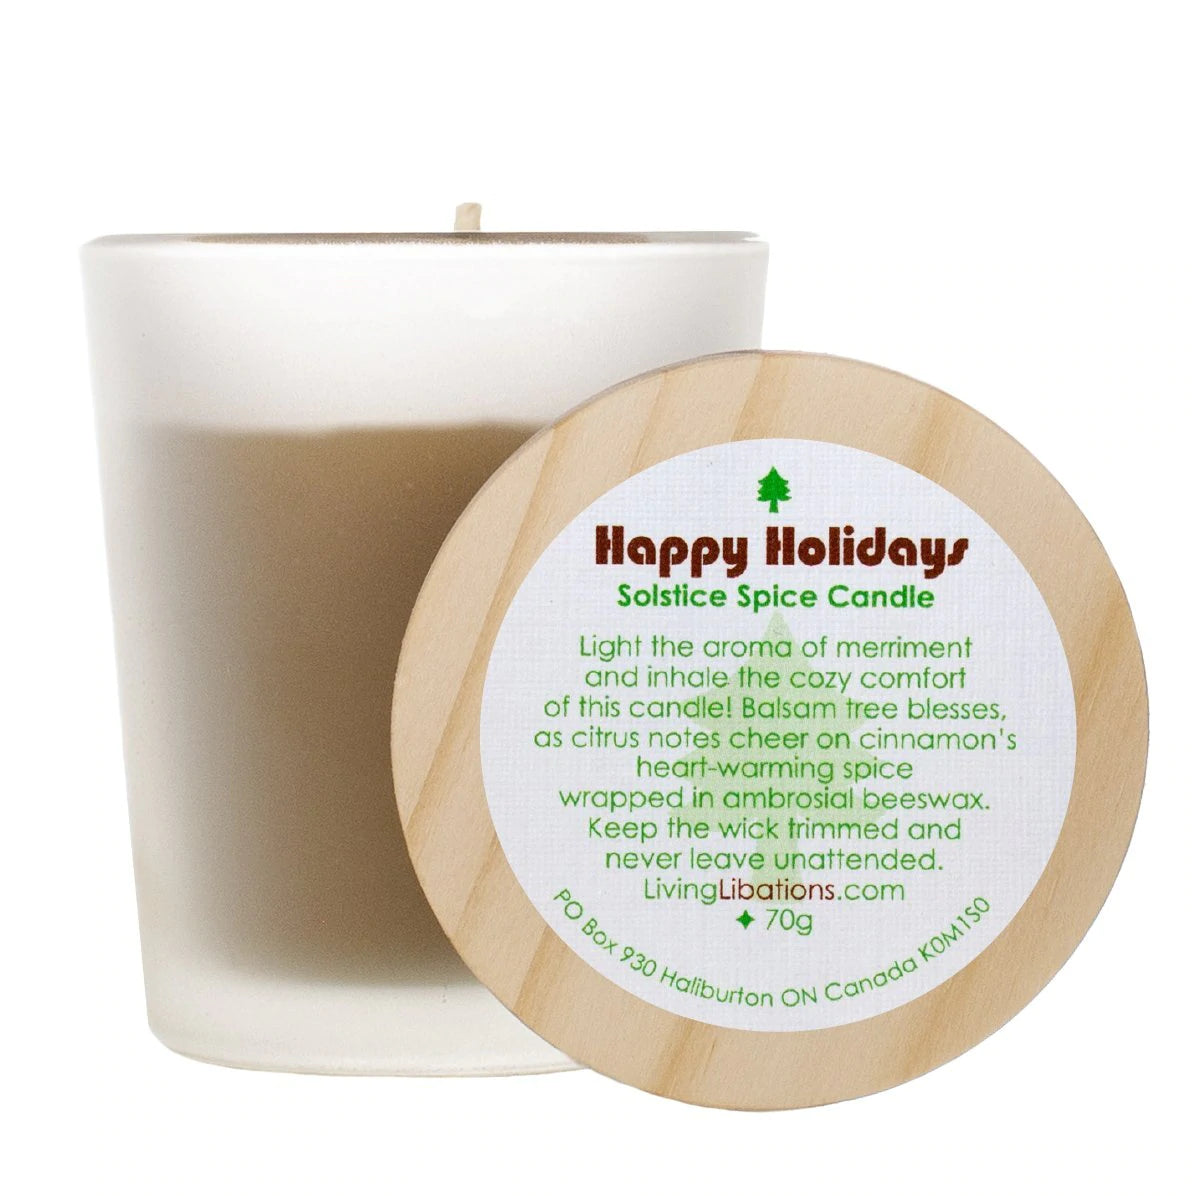 Happy Holidays Solstice Spice Candle